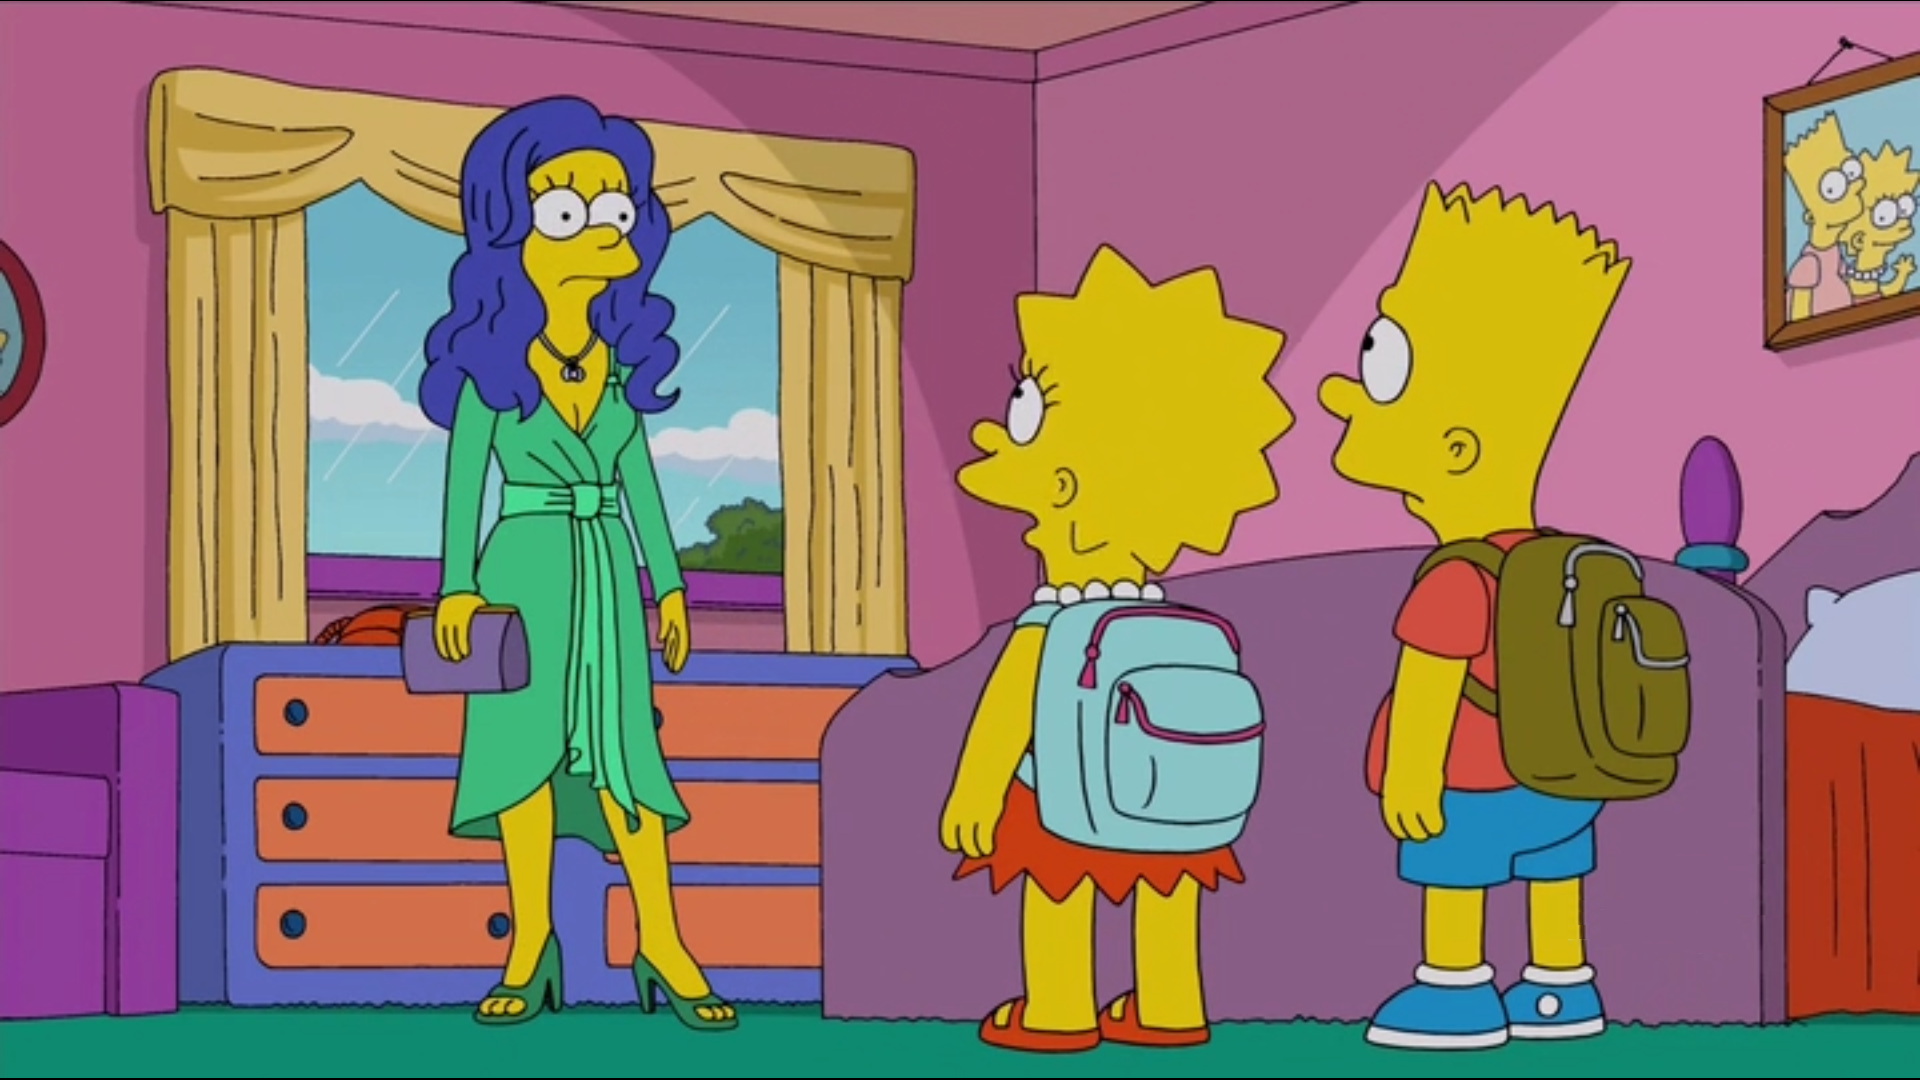 1. Marge Simpson - wide 3